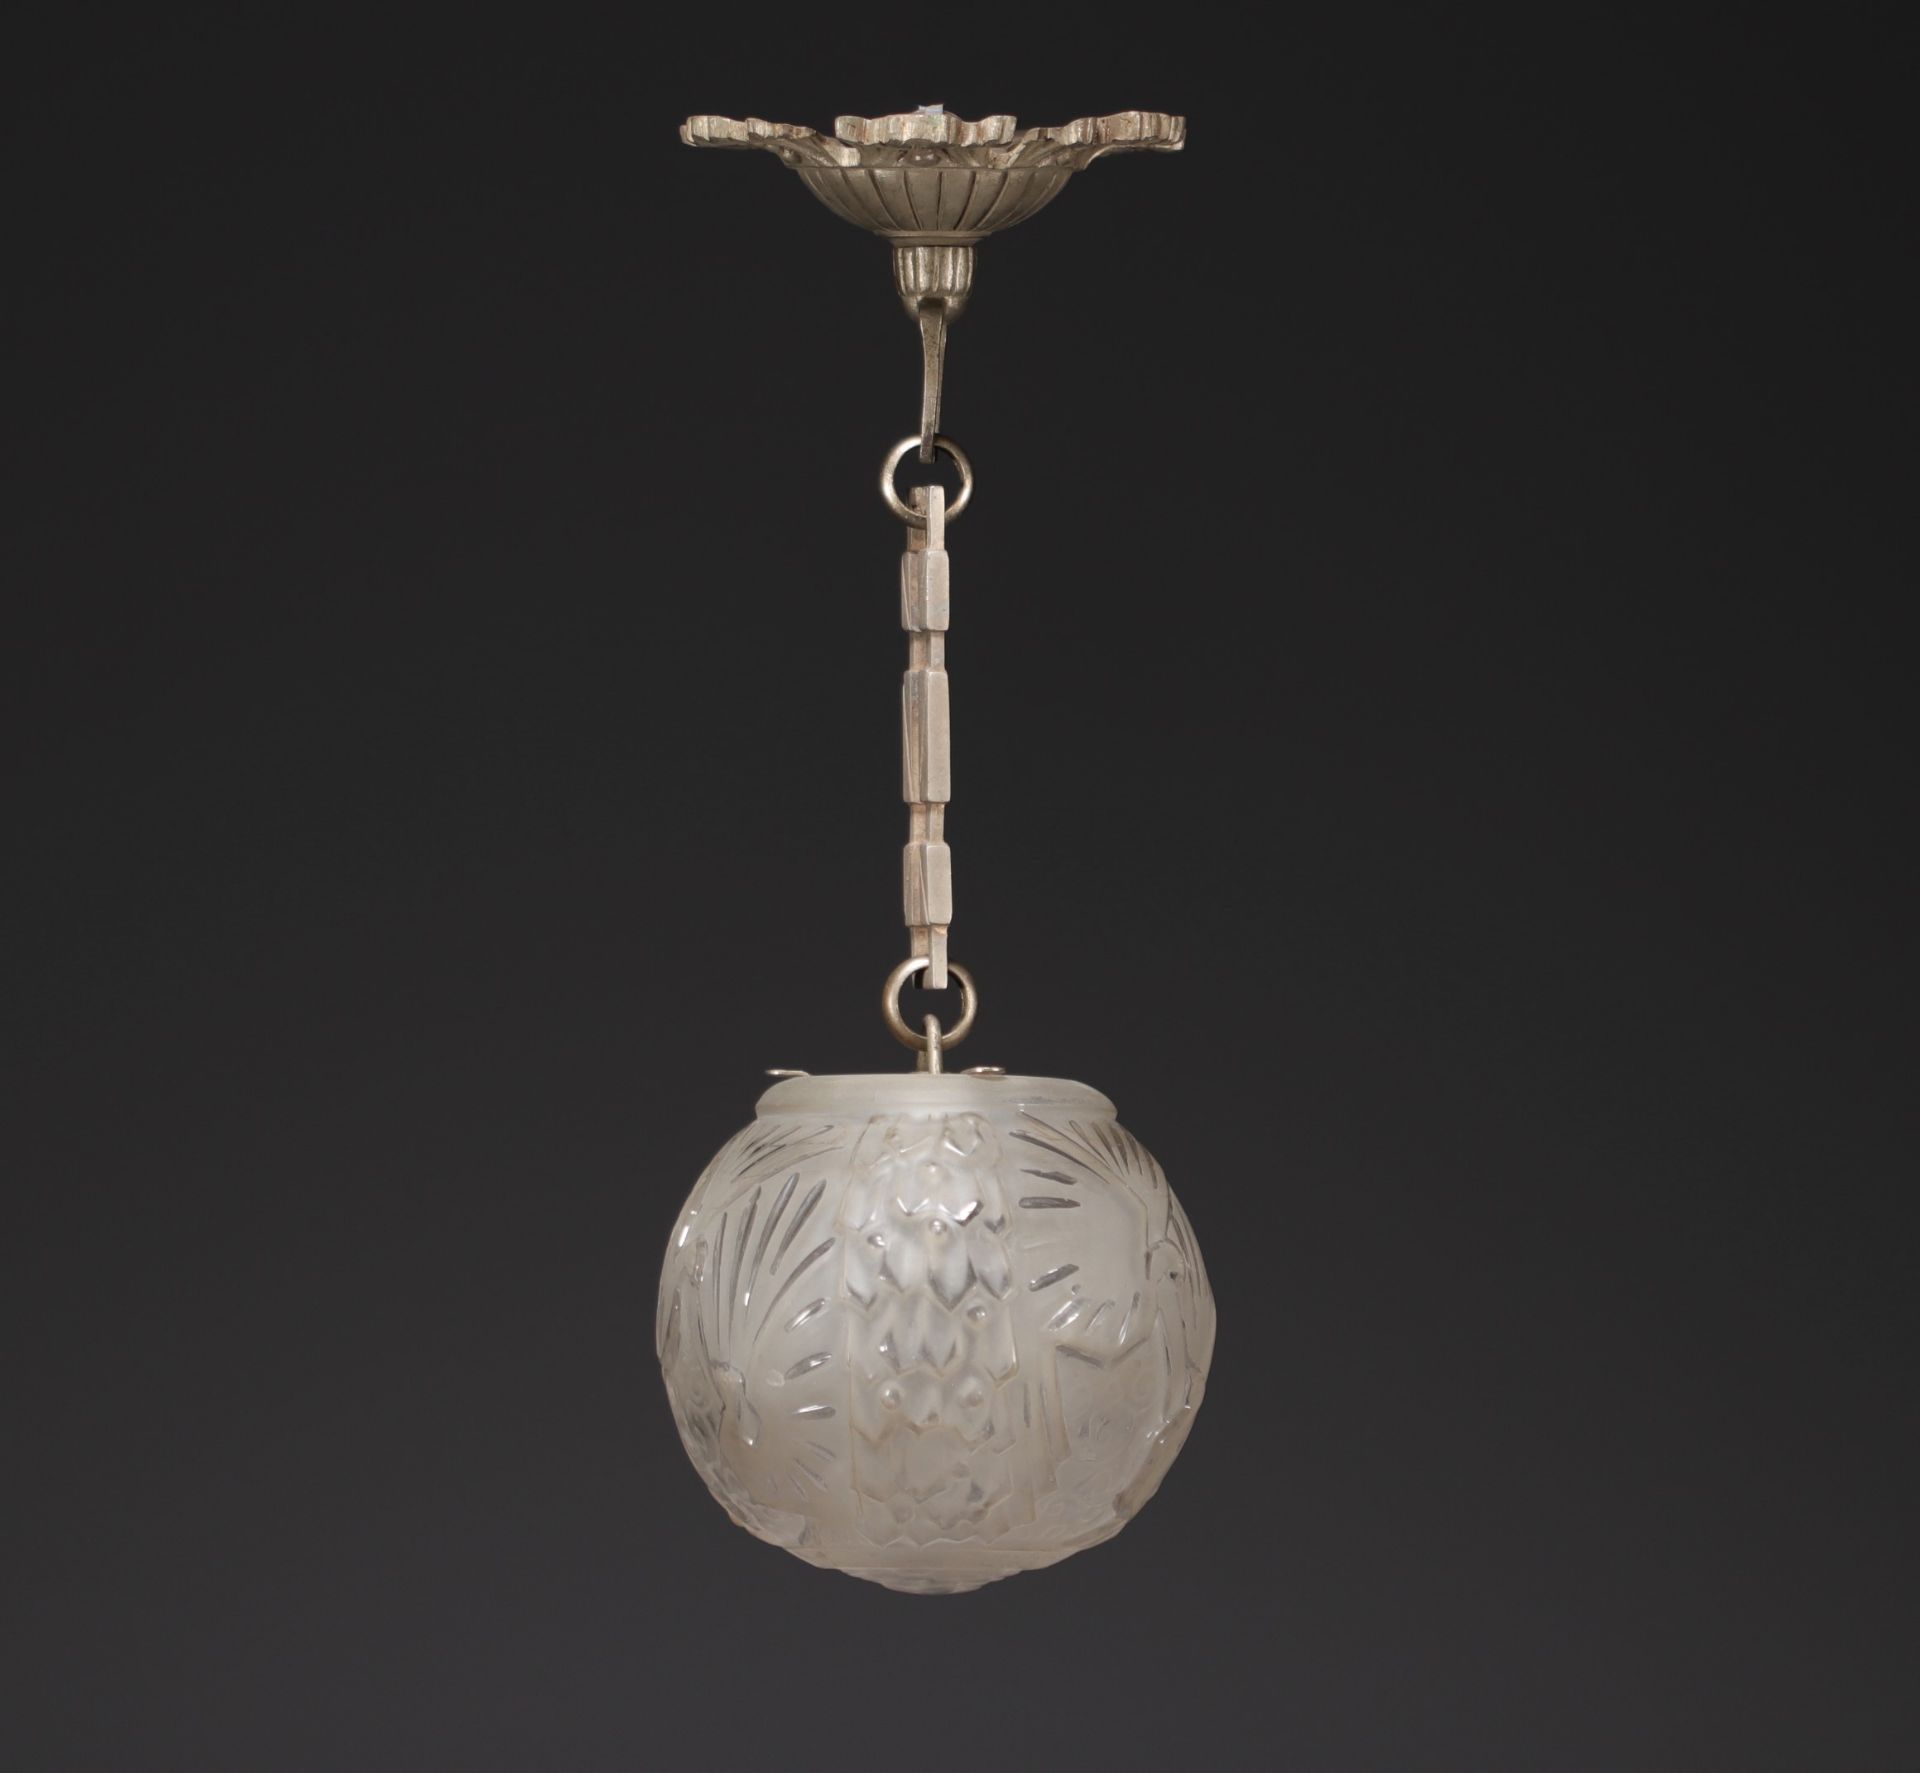 MULLER Freres Luneville - Art Deco hanging lamp, glass globe with peacock decoration. - Image 2 of 4